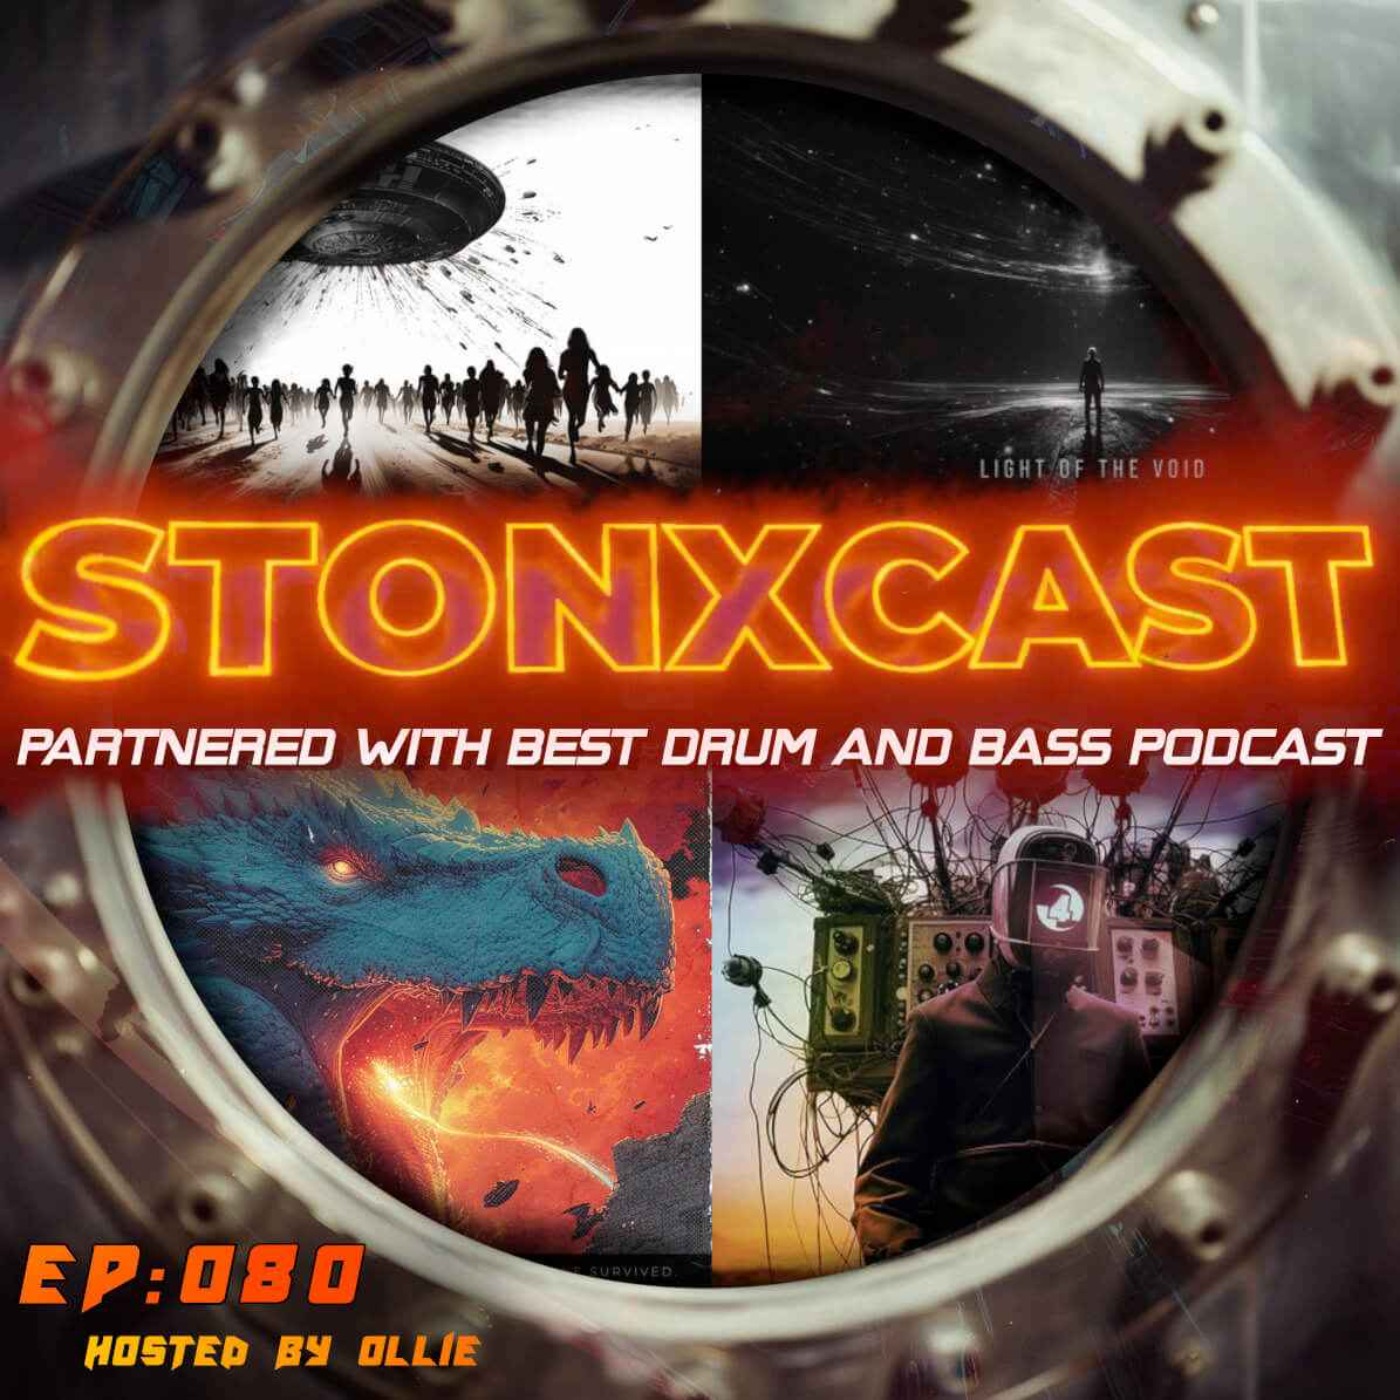 Stonxcast EP:080 - Hosted by Ollie Artwork